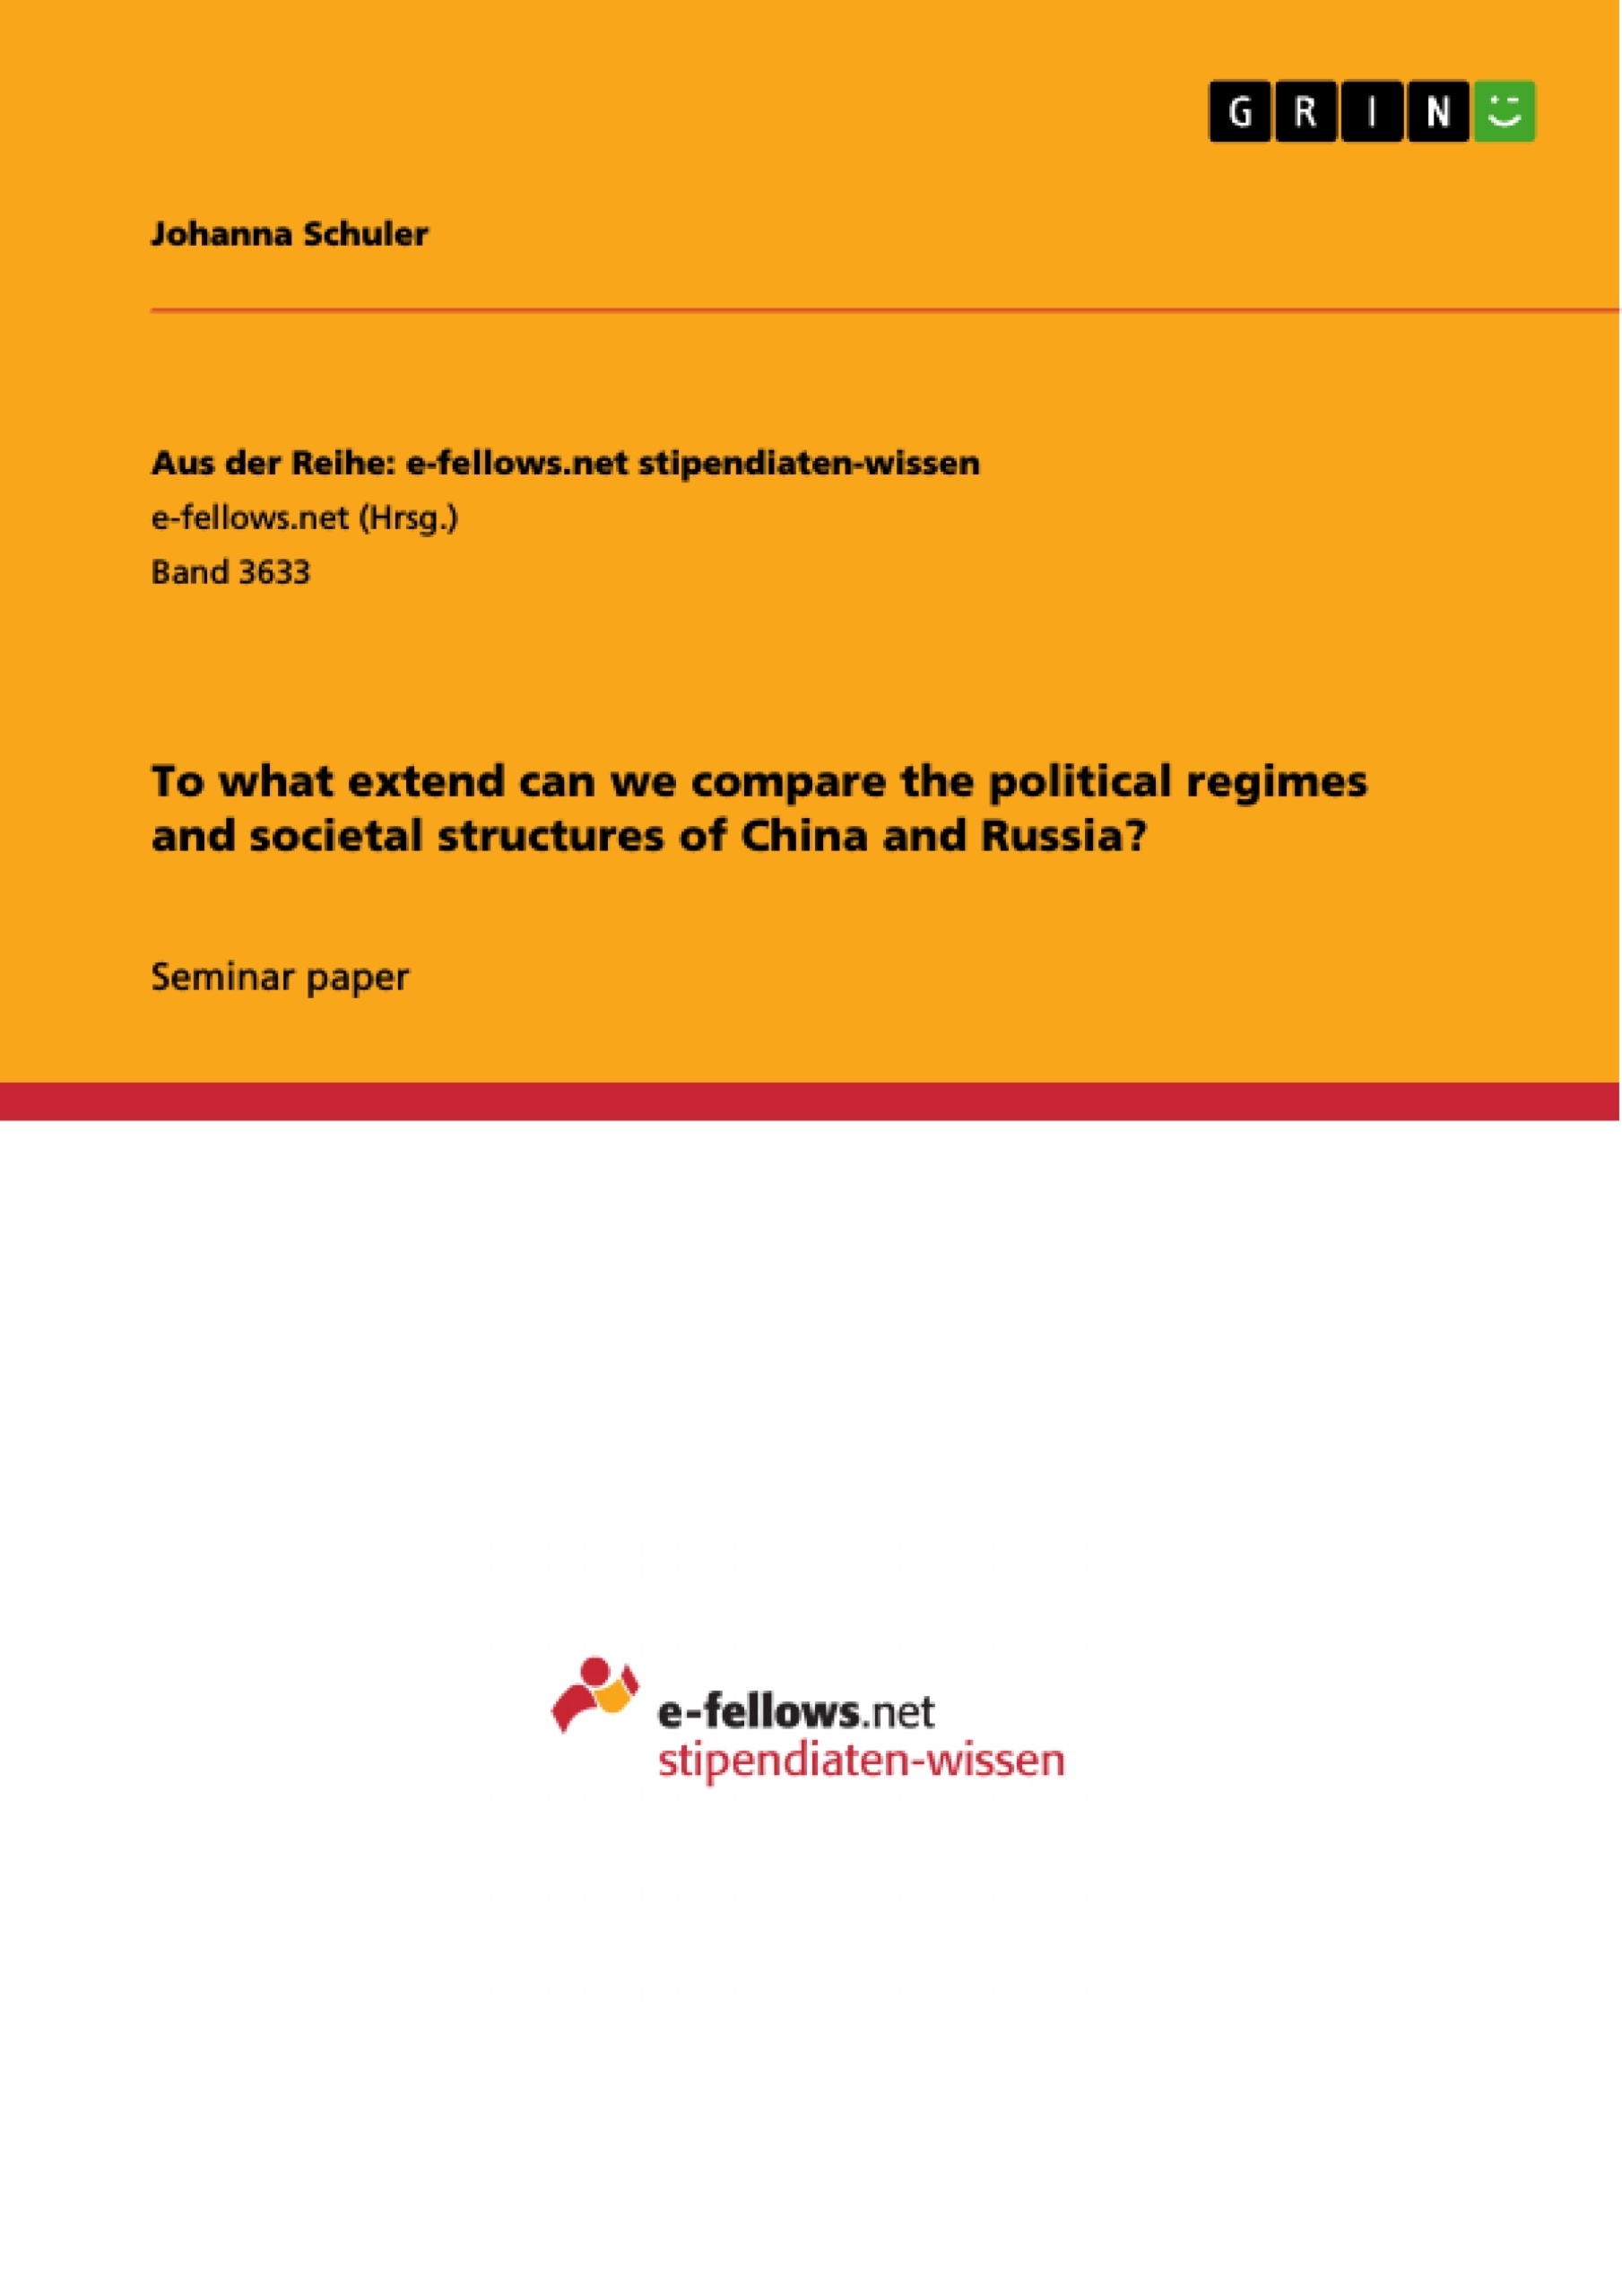 Title: To what extend can we compare the political regimes and societal structures of China and Russia?